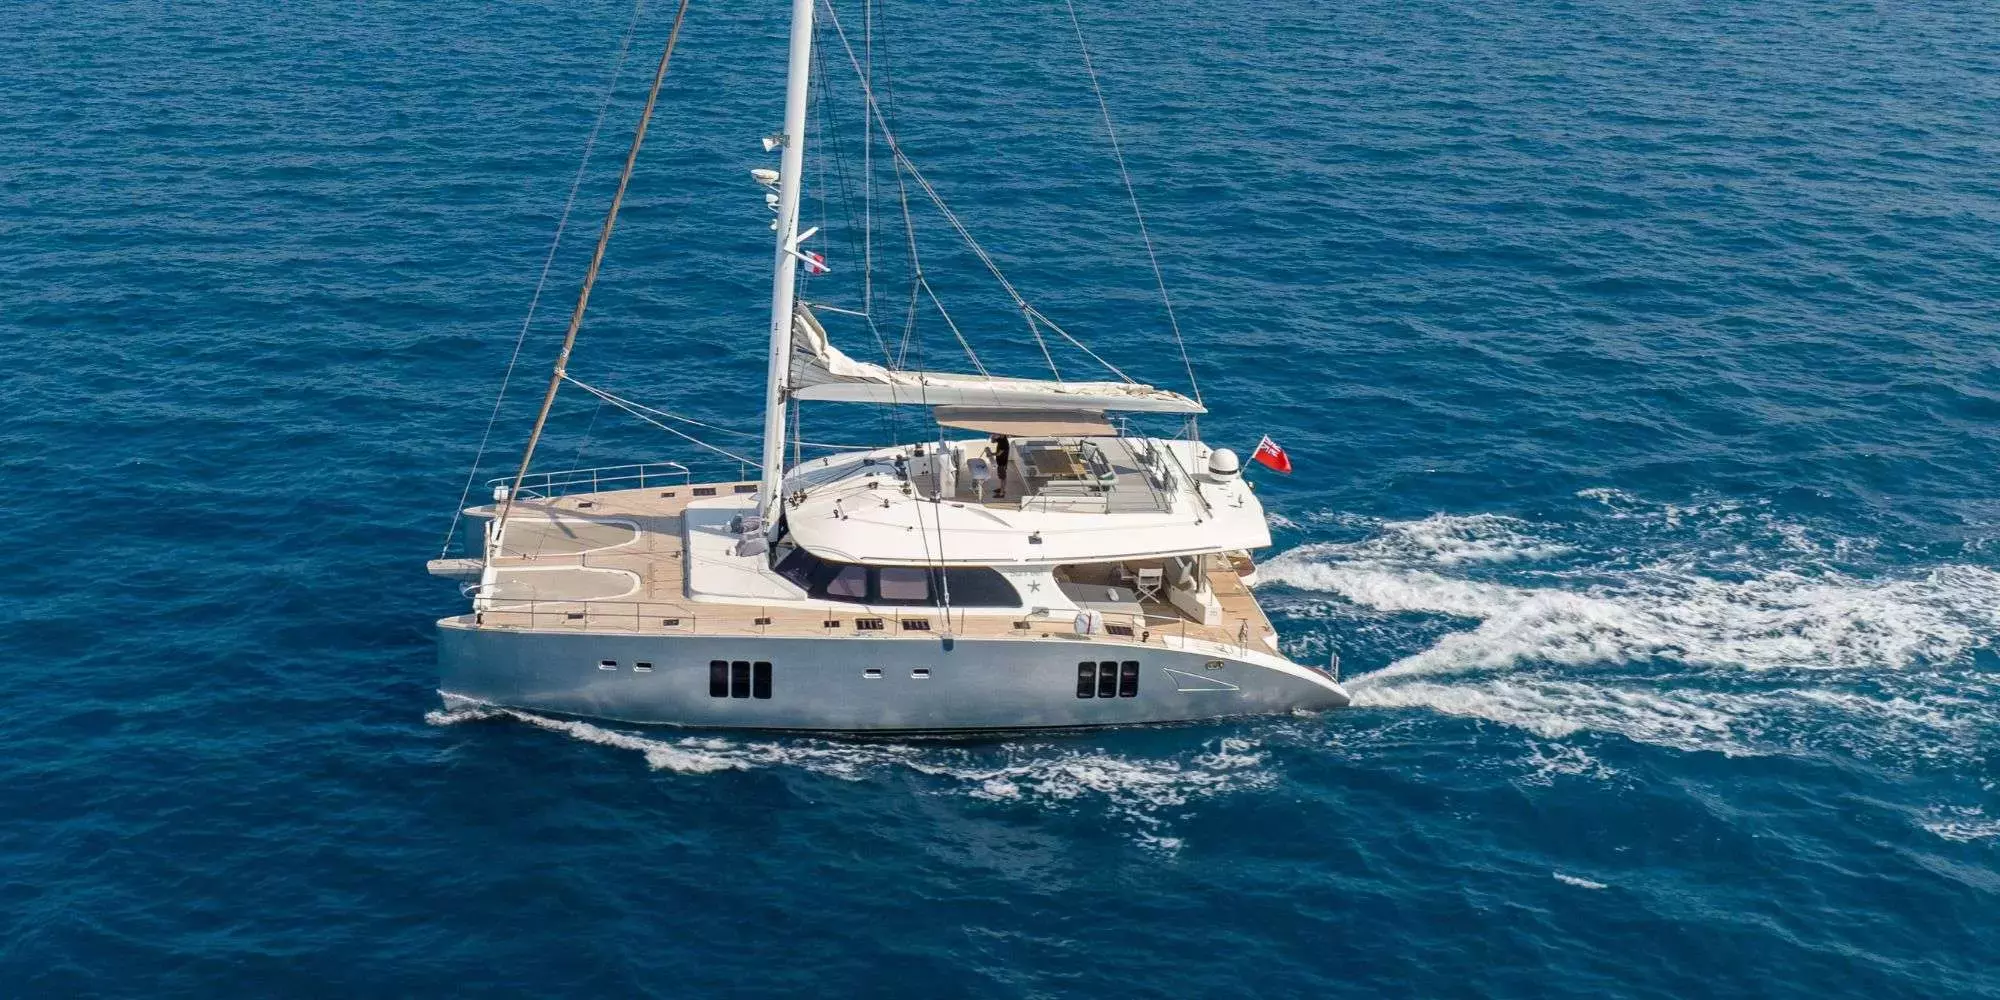 Seazen II by Sunreef Yachts - Special Offer for a private Luxury Catamaran Charter in St Tropez with a crew